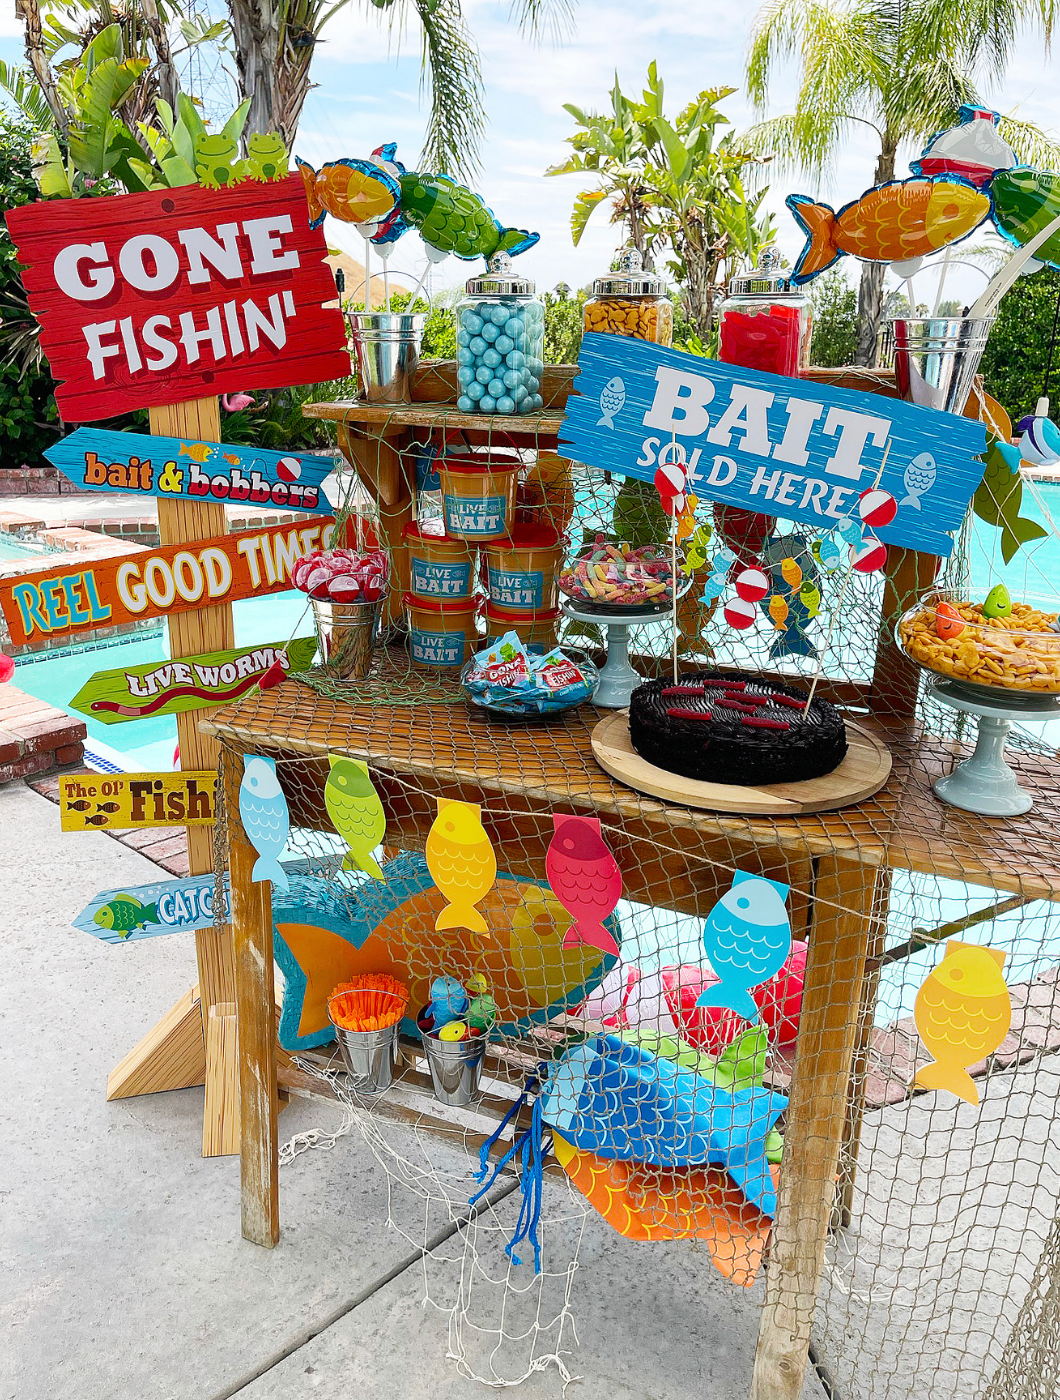 How to Decorations for a Fishing Themed Party - My Humble Home and